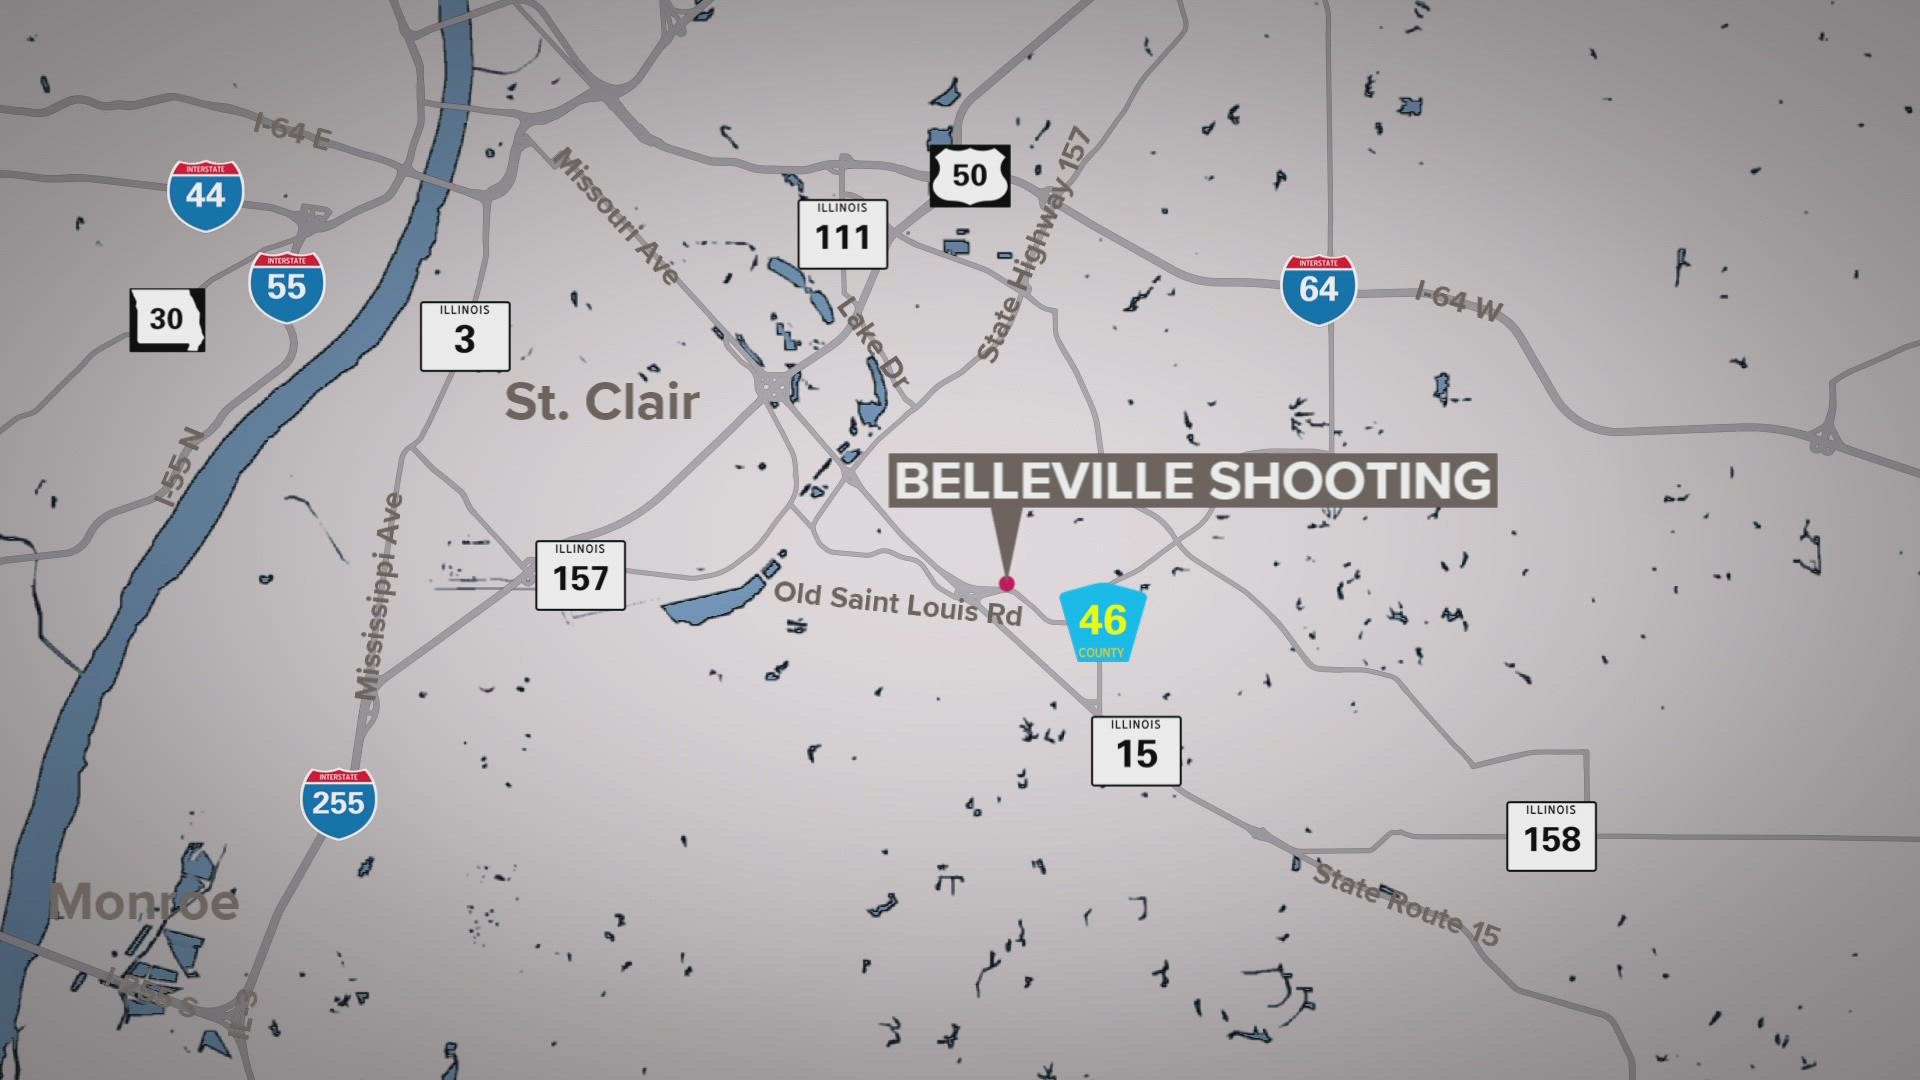 Two men were hospitalized following shootings just a block apart Wednesday night in Belleville.